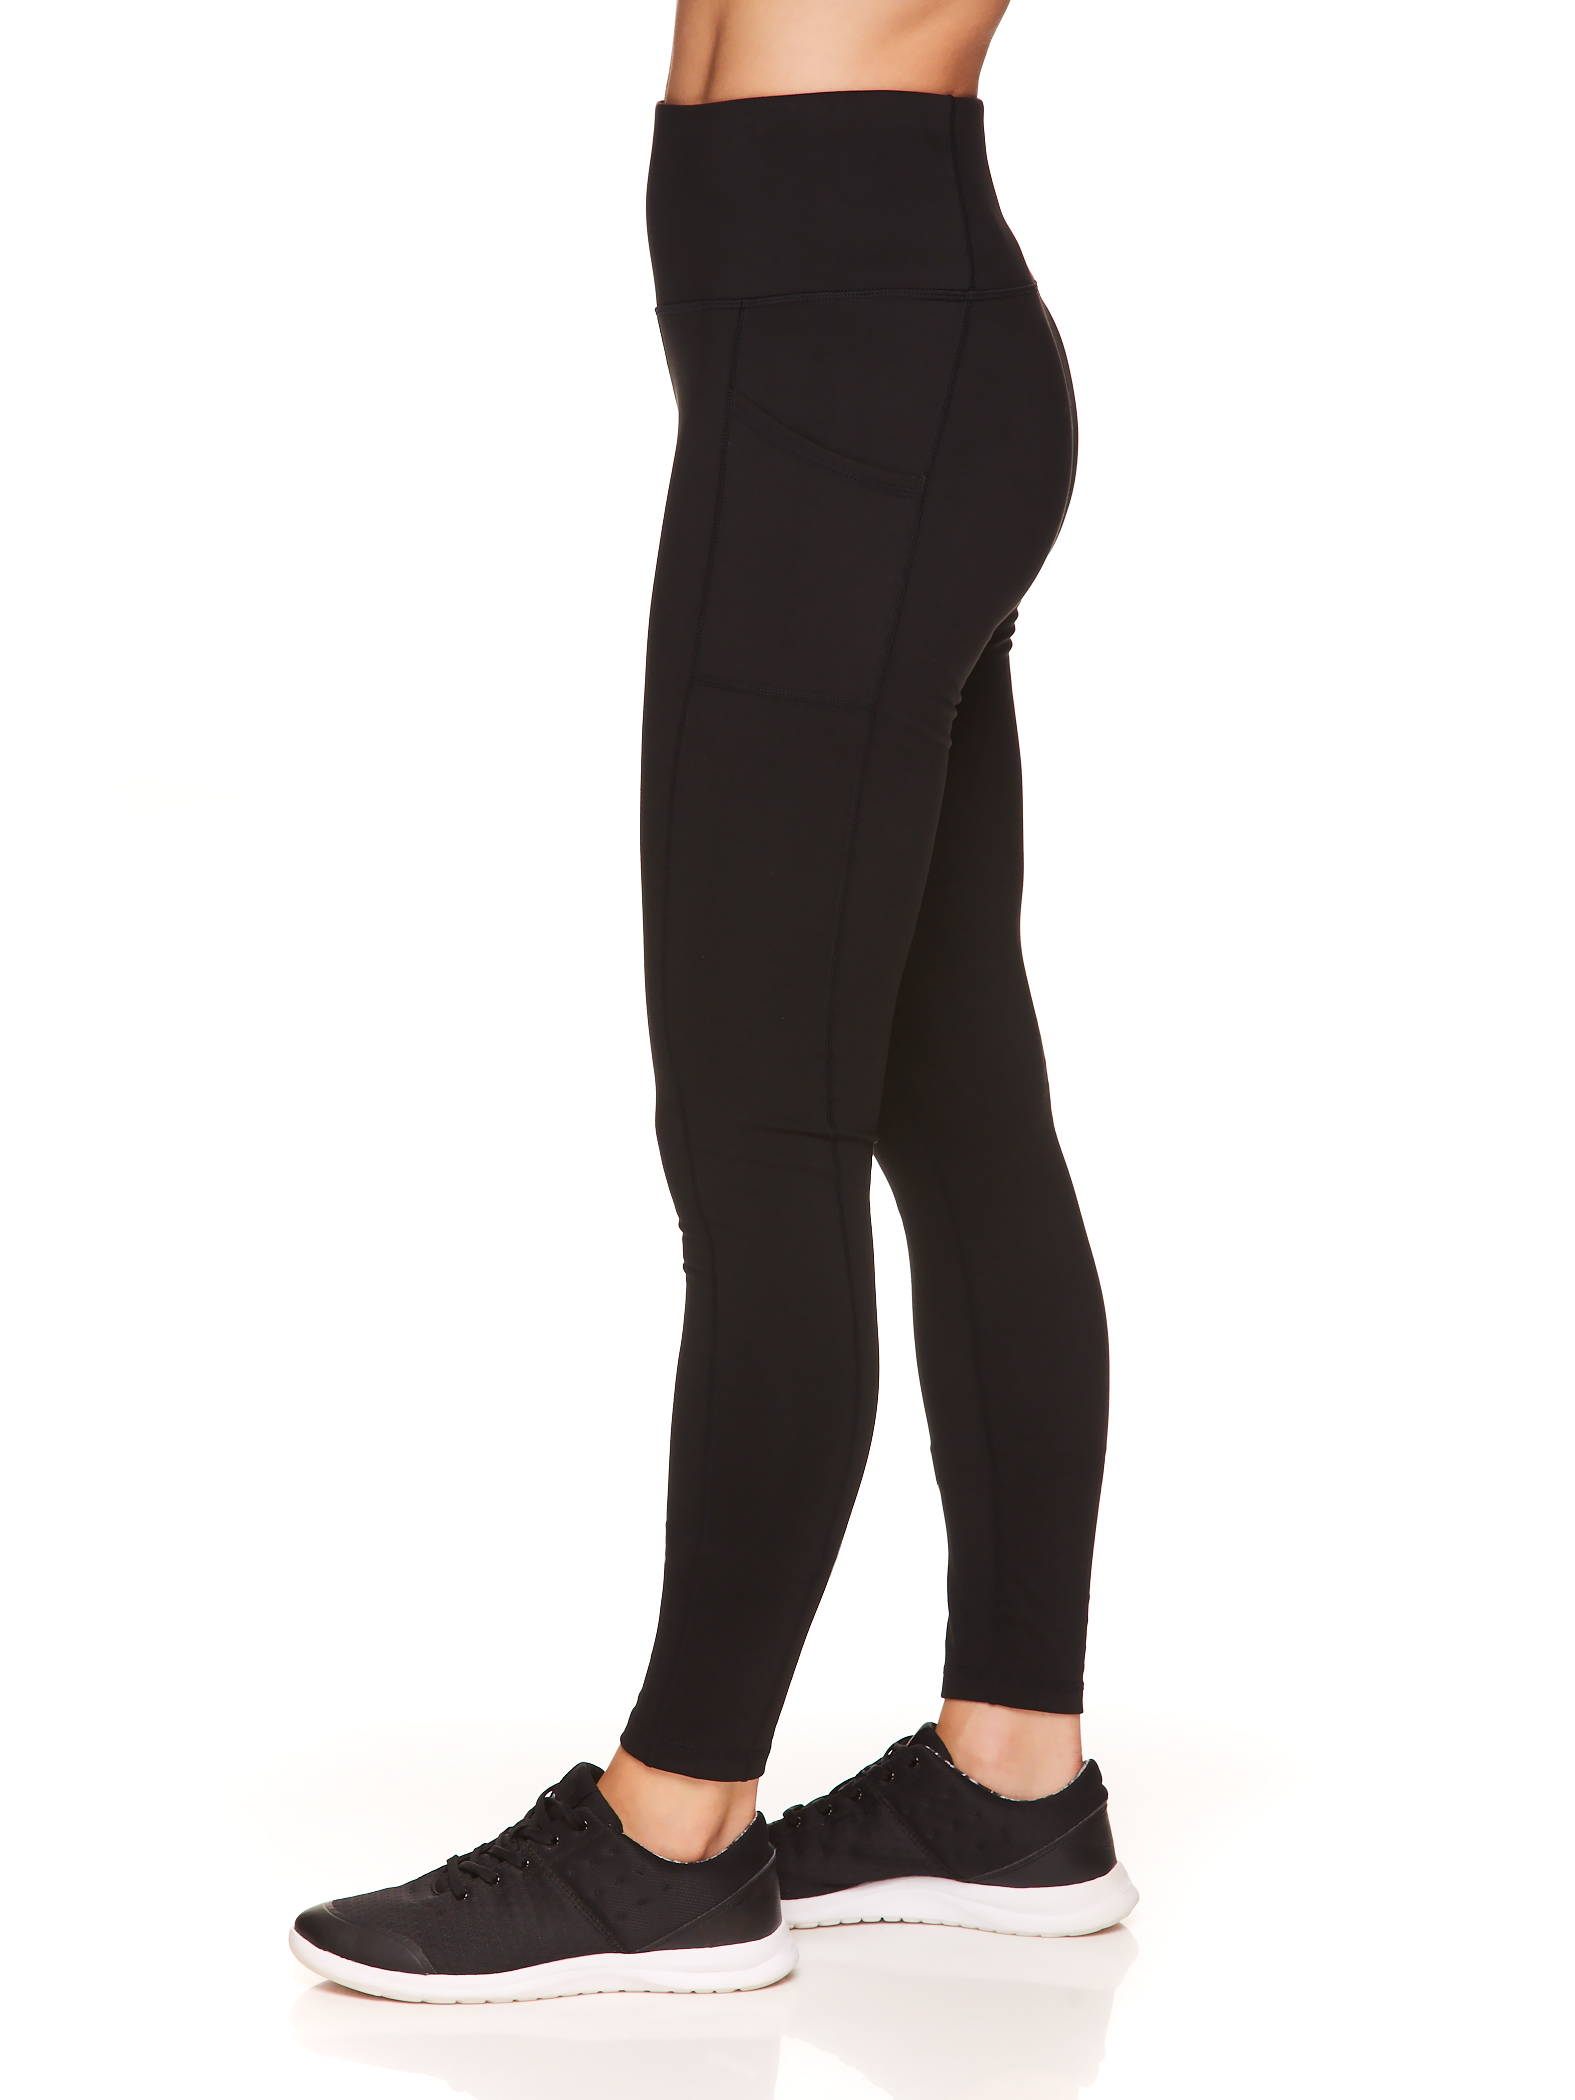 Reebok Women's Everyday High-Waisted Active Leggings with Pockets, 28" Inseam - image 4 of 4